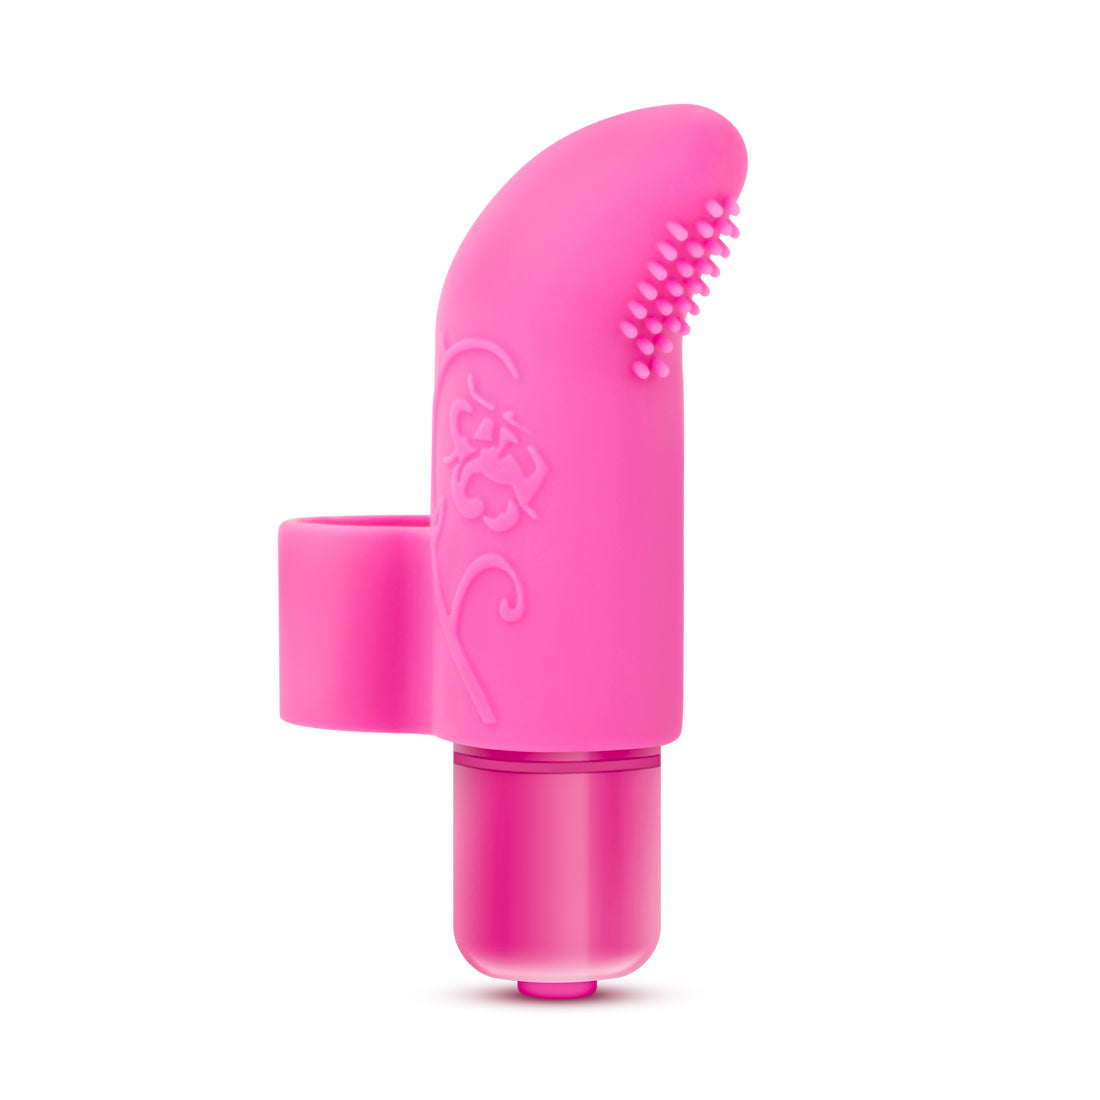 Pink vibrator with silicone sleeve that has a curved tip and a ring on the back to secure it to a finger. Subtle floral pattern and small nubs on curved end for added stimulation. Button on bottom to adjust intensity. Additional images show alternate angles.